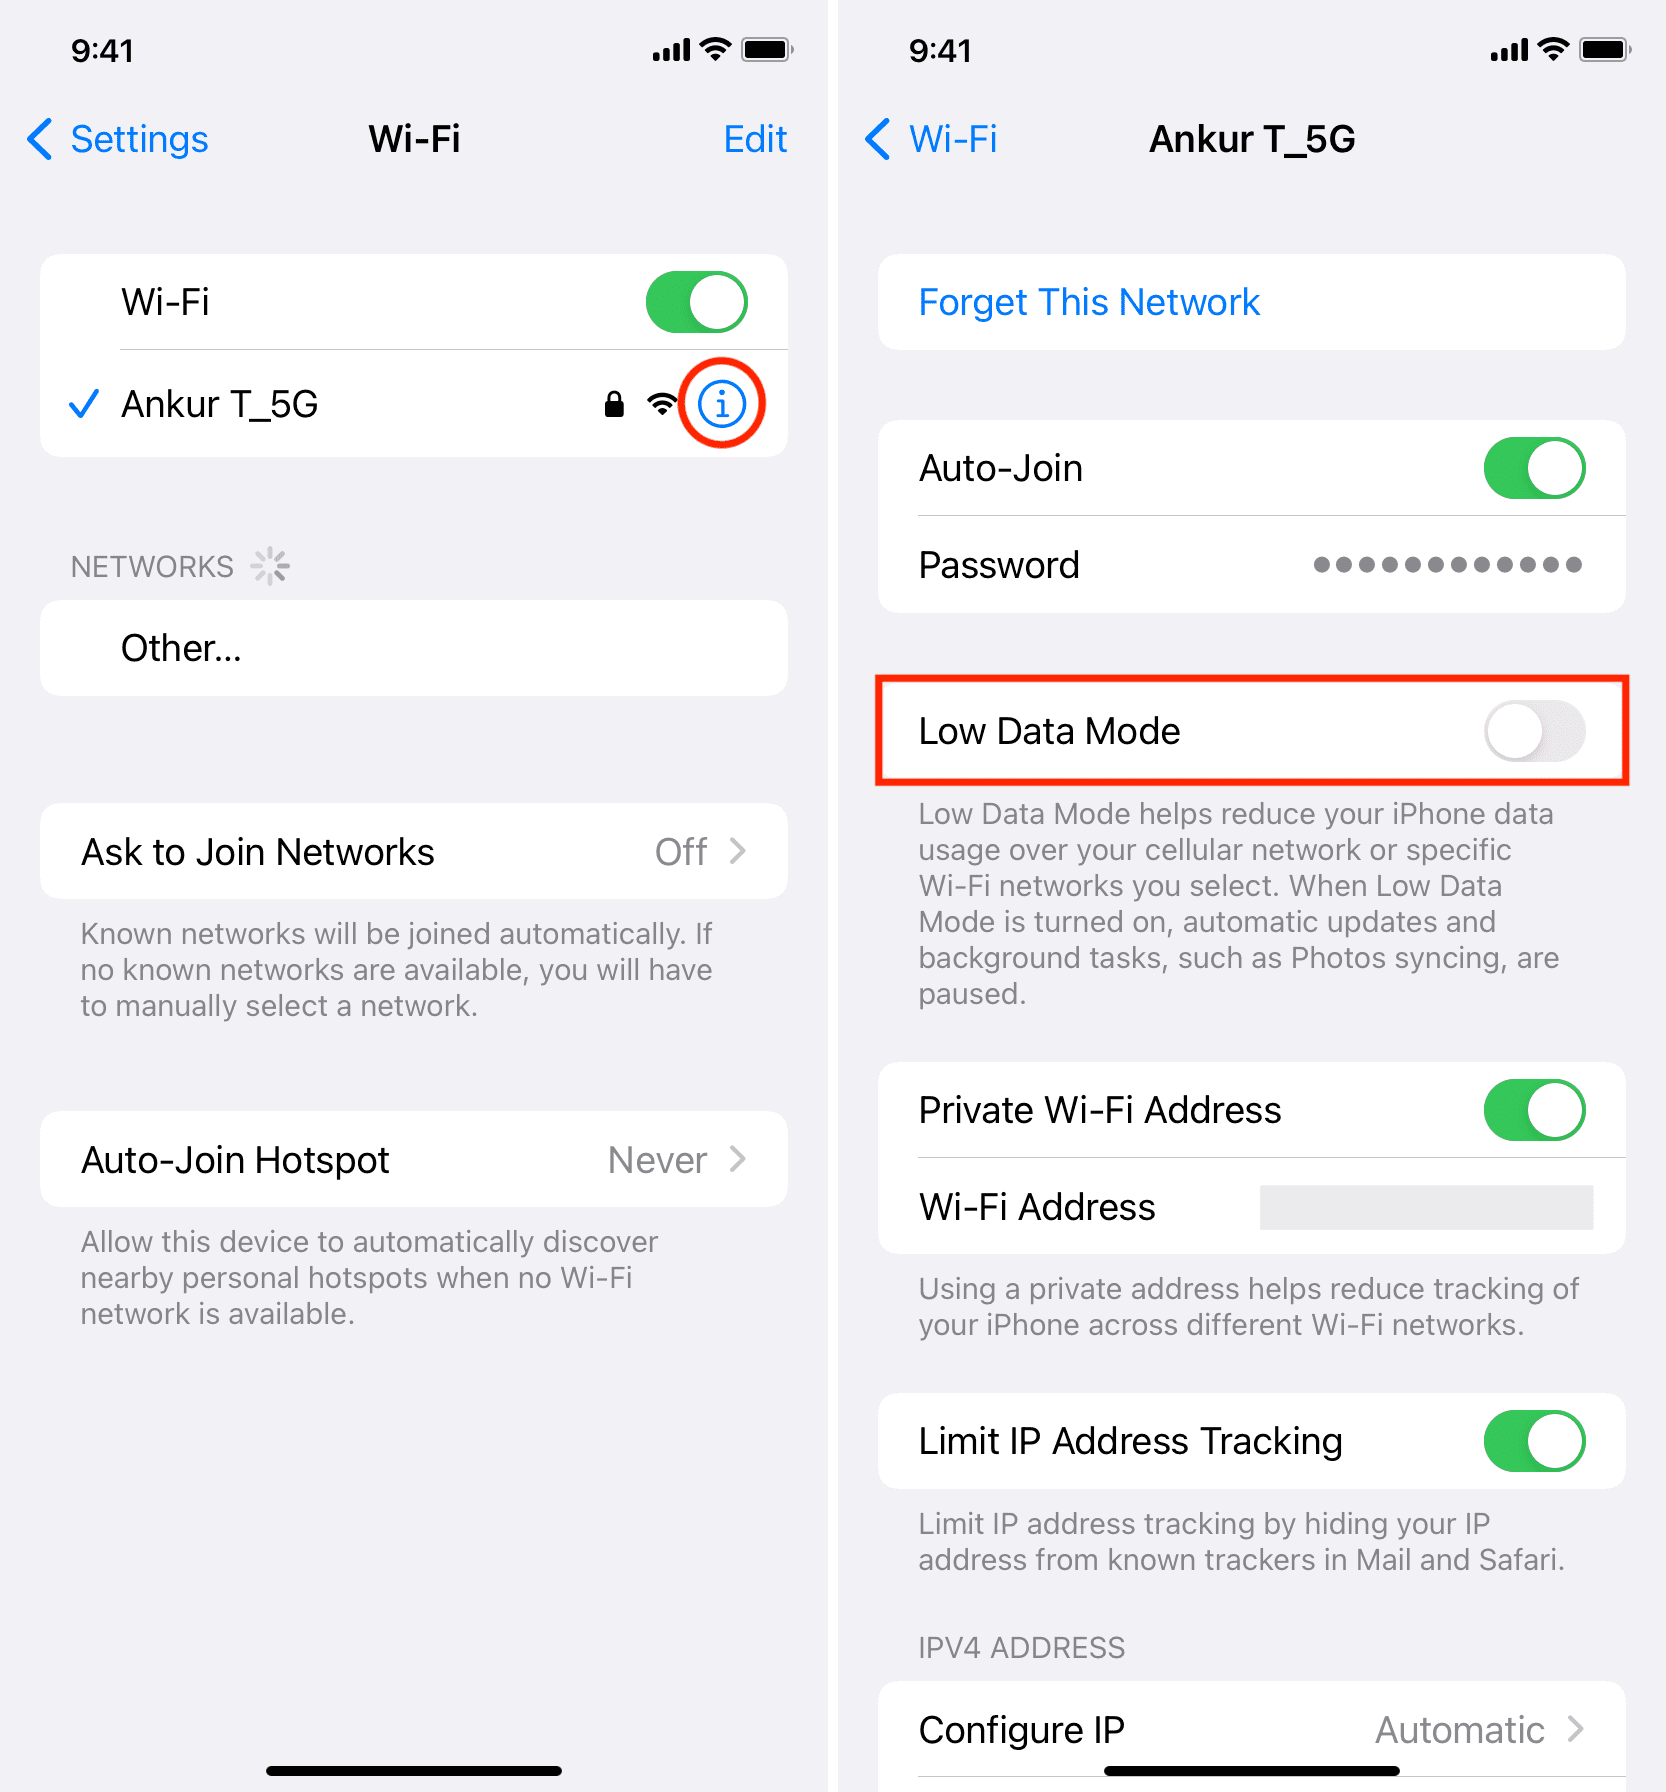 Turn off Low Data Mode for Wi-Fi on iPhone